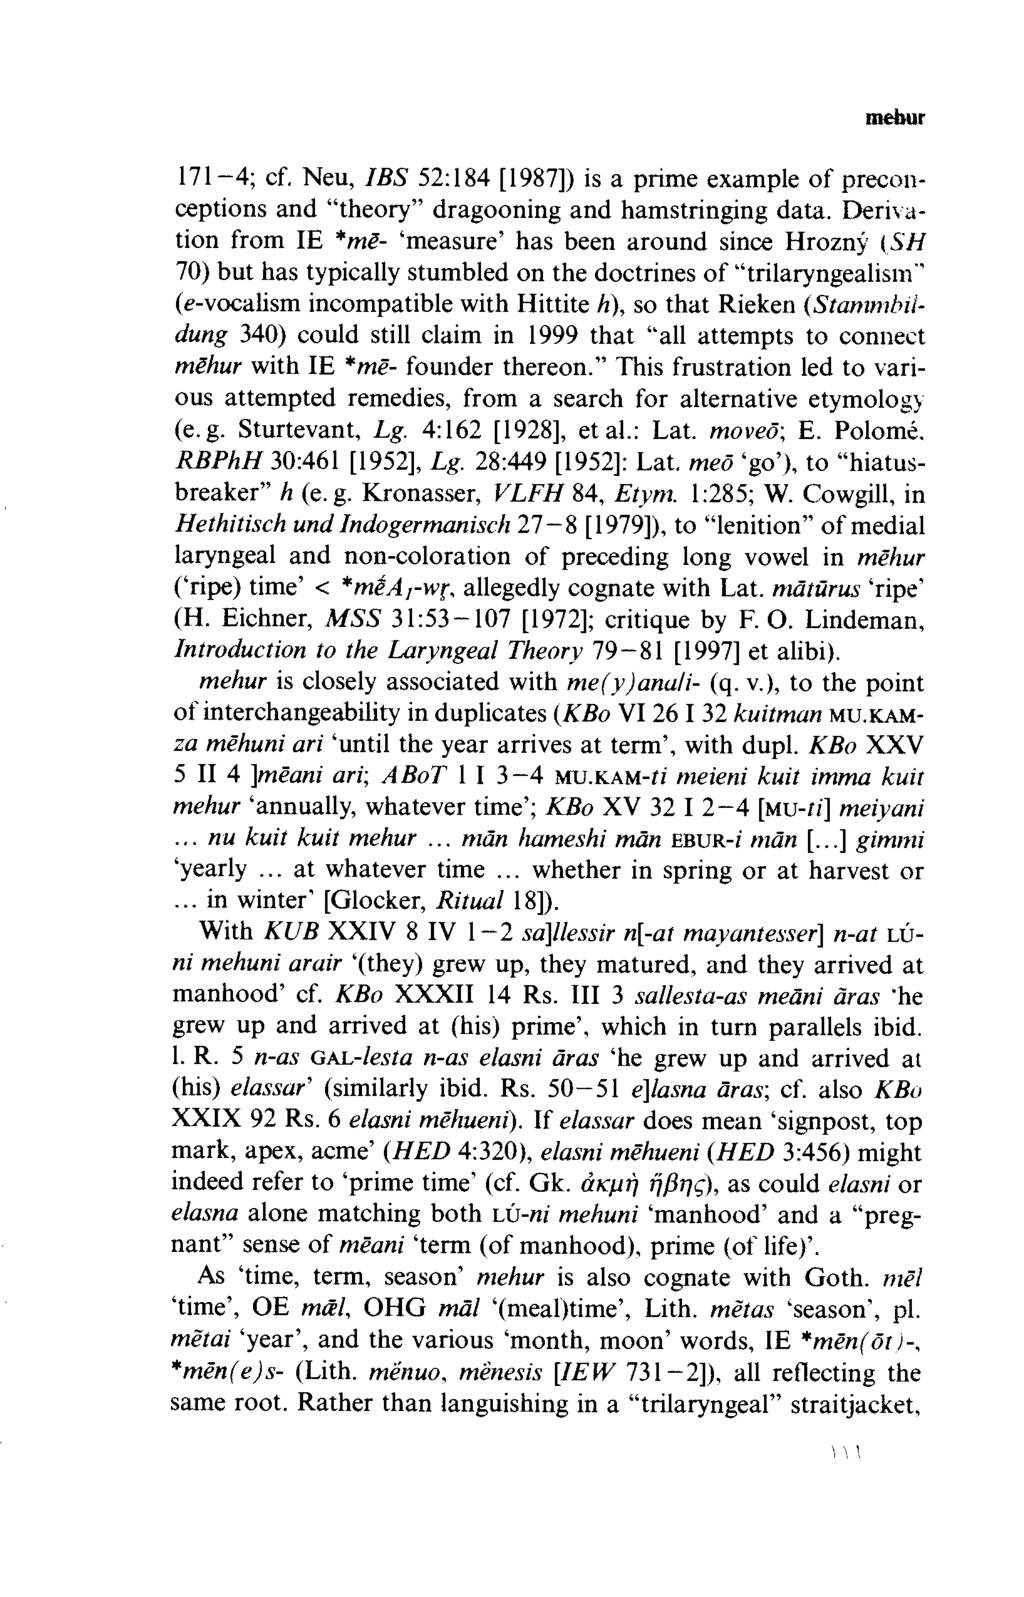 mebur 171-4; cf. Neu, IB S 52:184 [1987]) is a prime example of preconceptions and theory dragooning and hamstringing data.